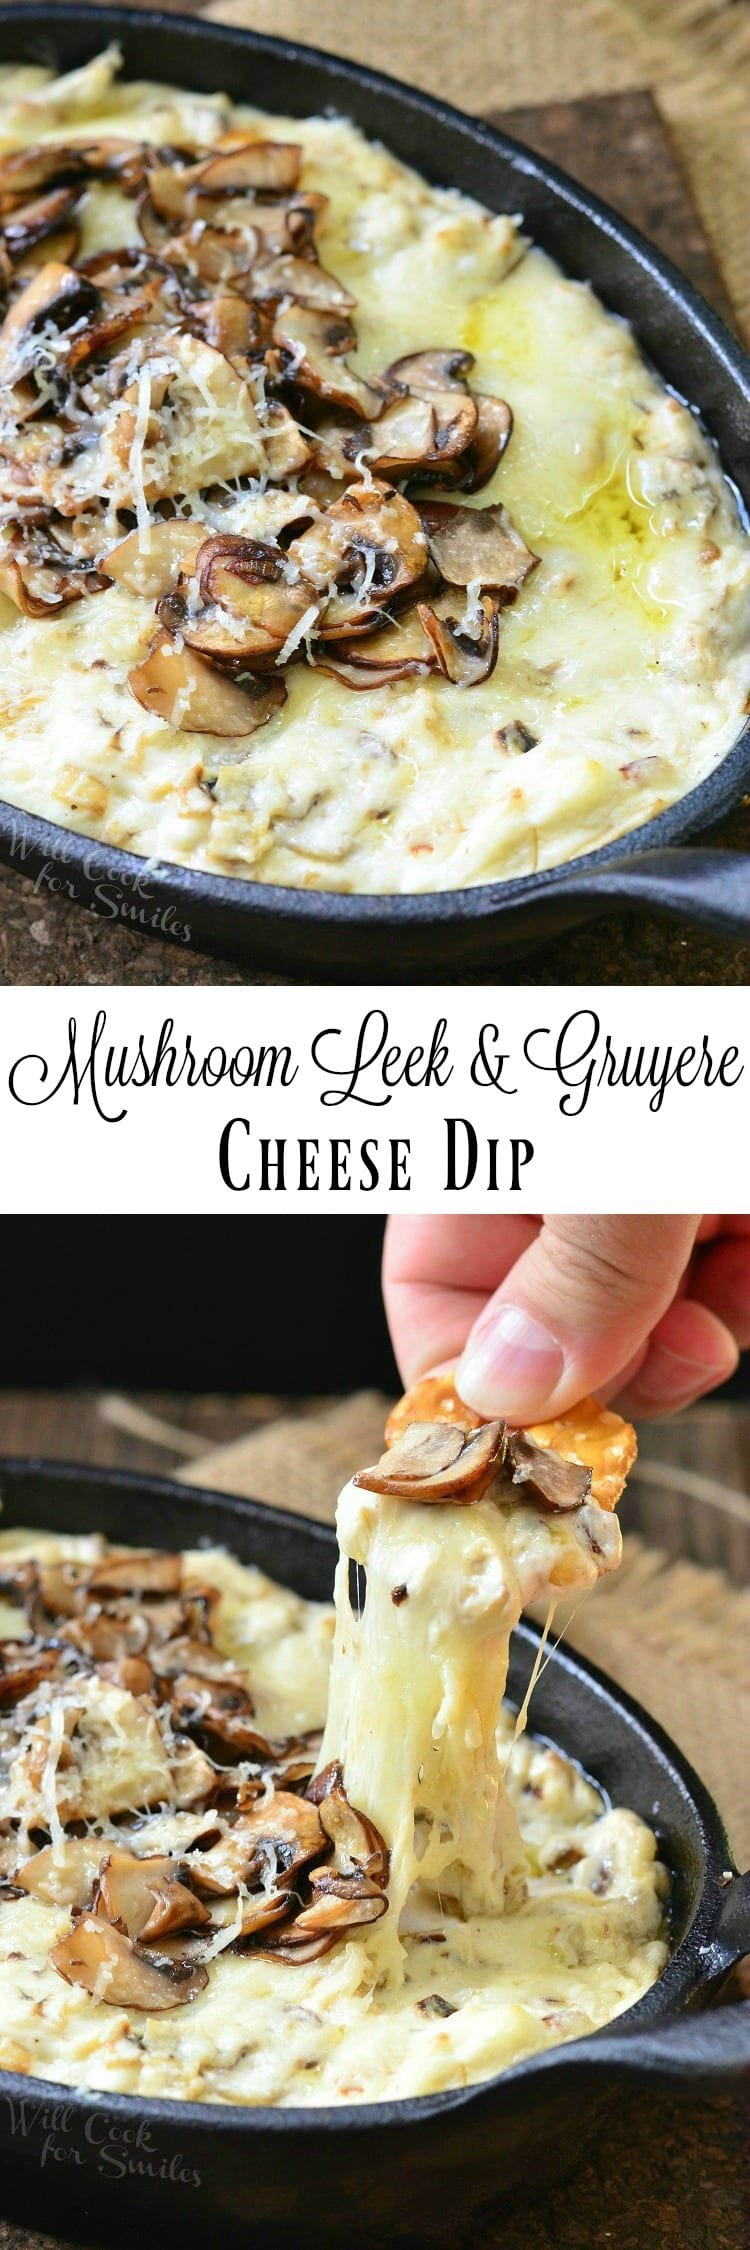 dipping a pretzel into Mushroom Leek and Gruyere Cheese Dip with mushrooms on the top in a cast iron pan collage